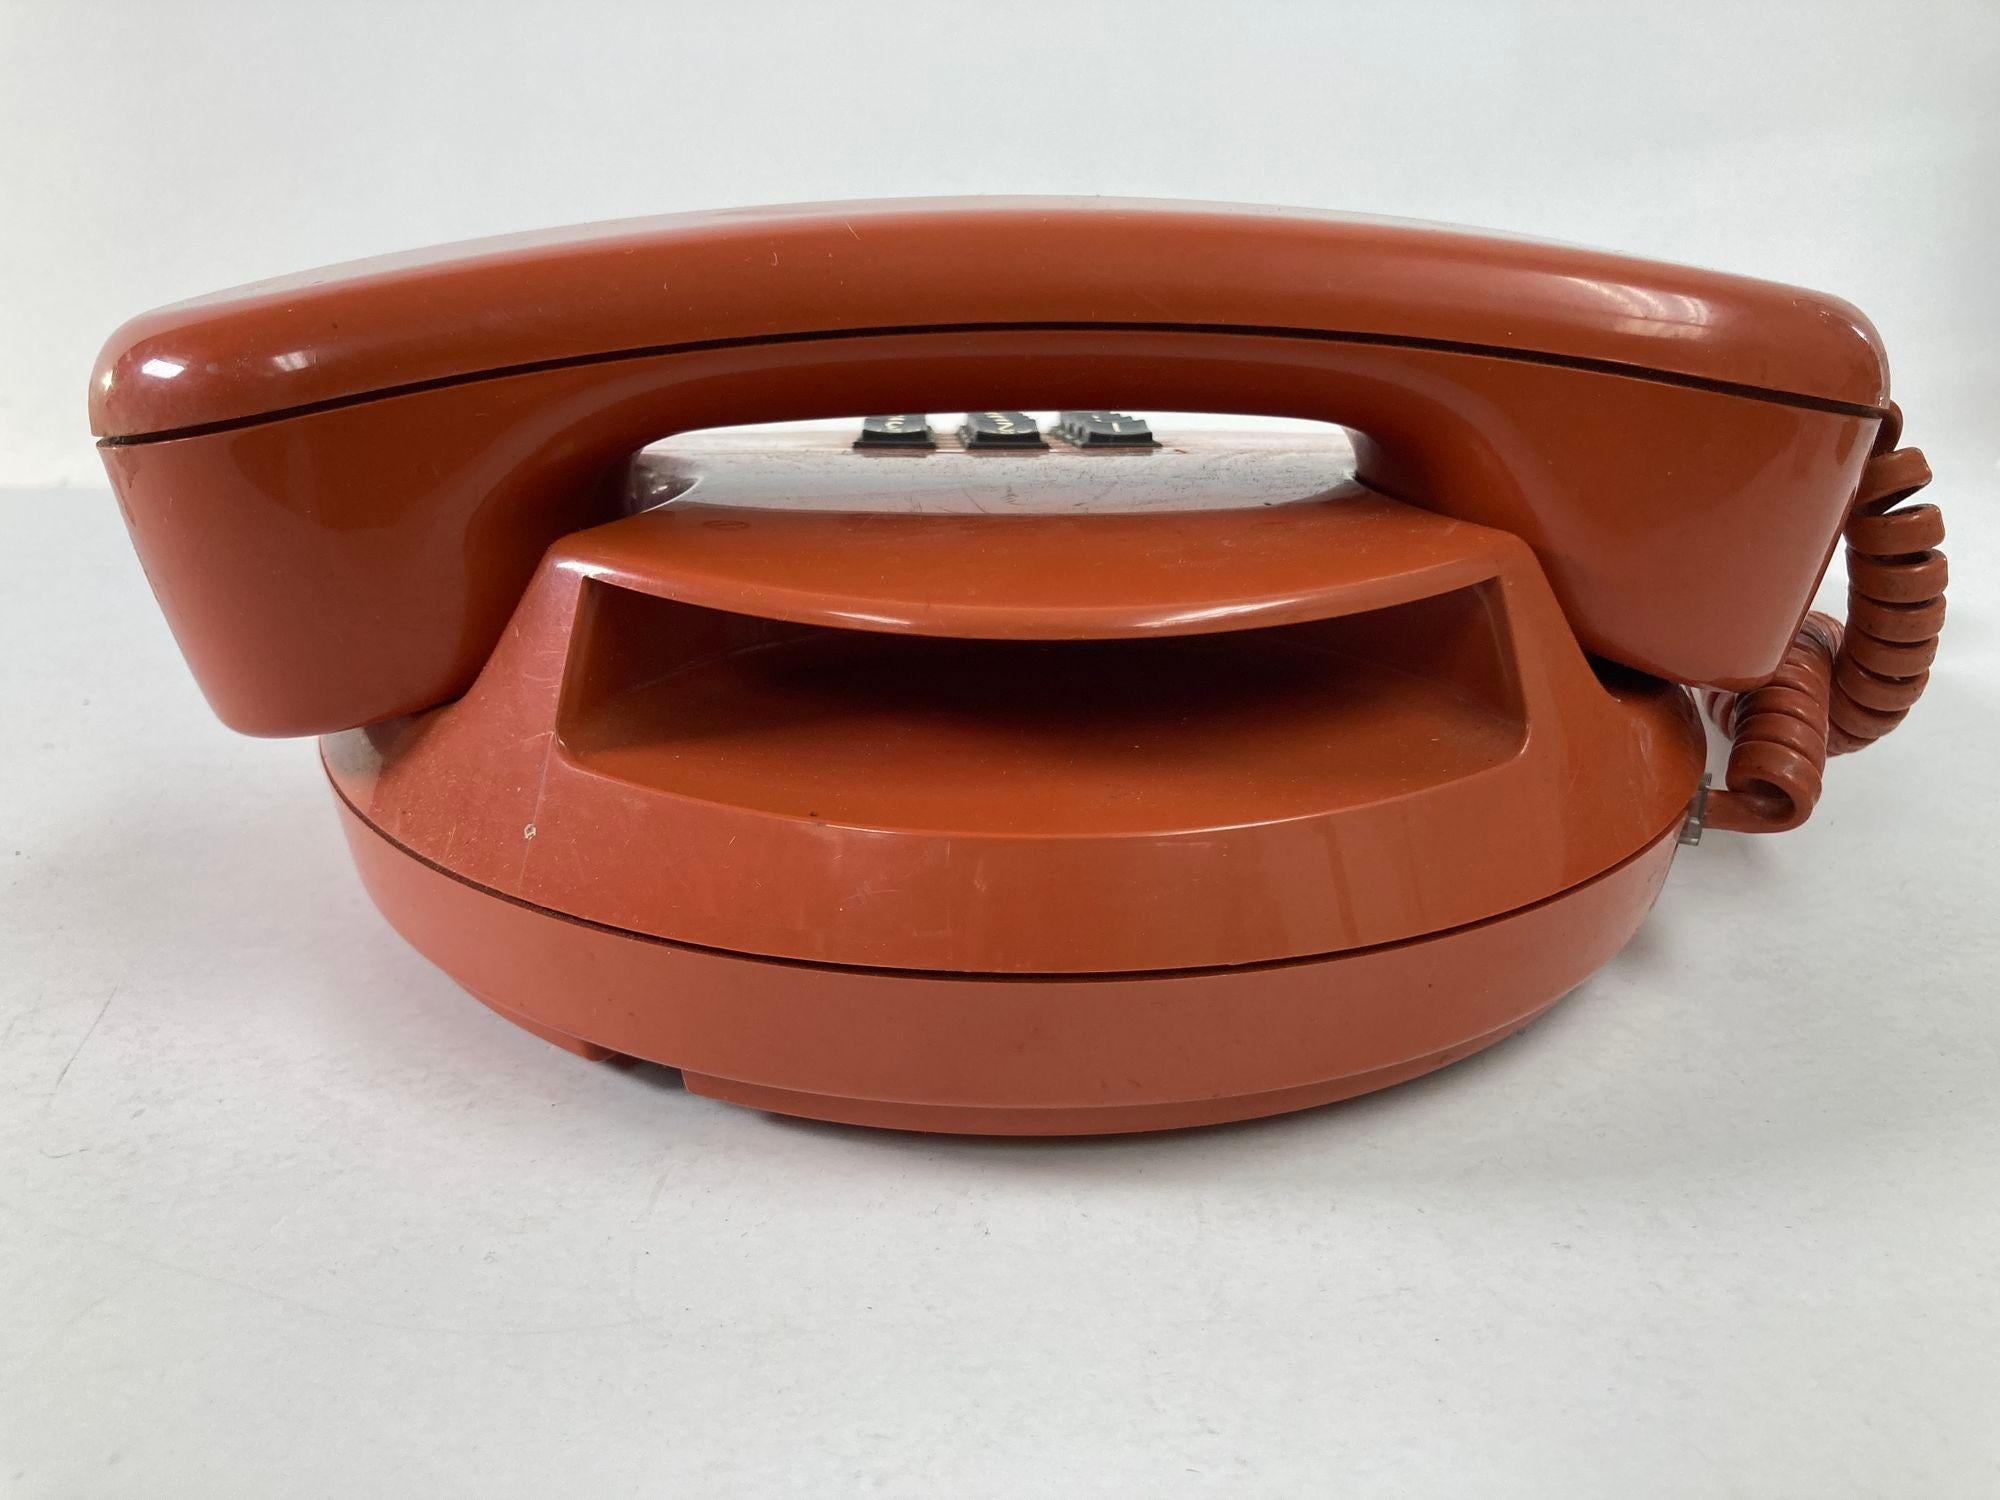 Vintage Retro Push-Button Round Telephone Burnt Orange Color from the, 70s 4